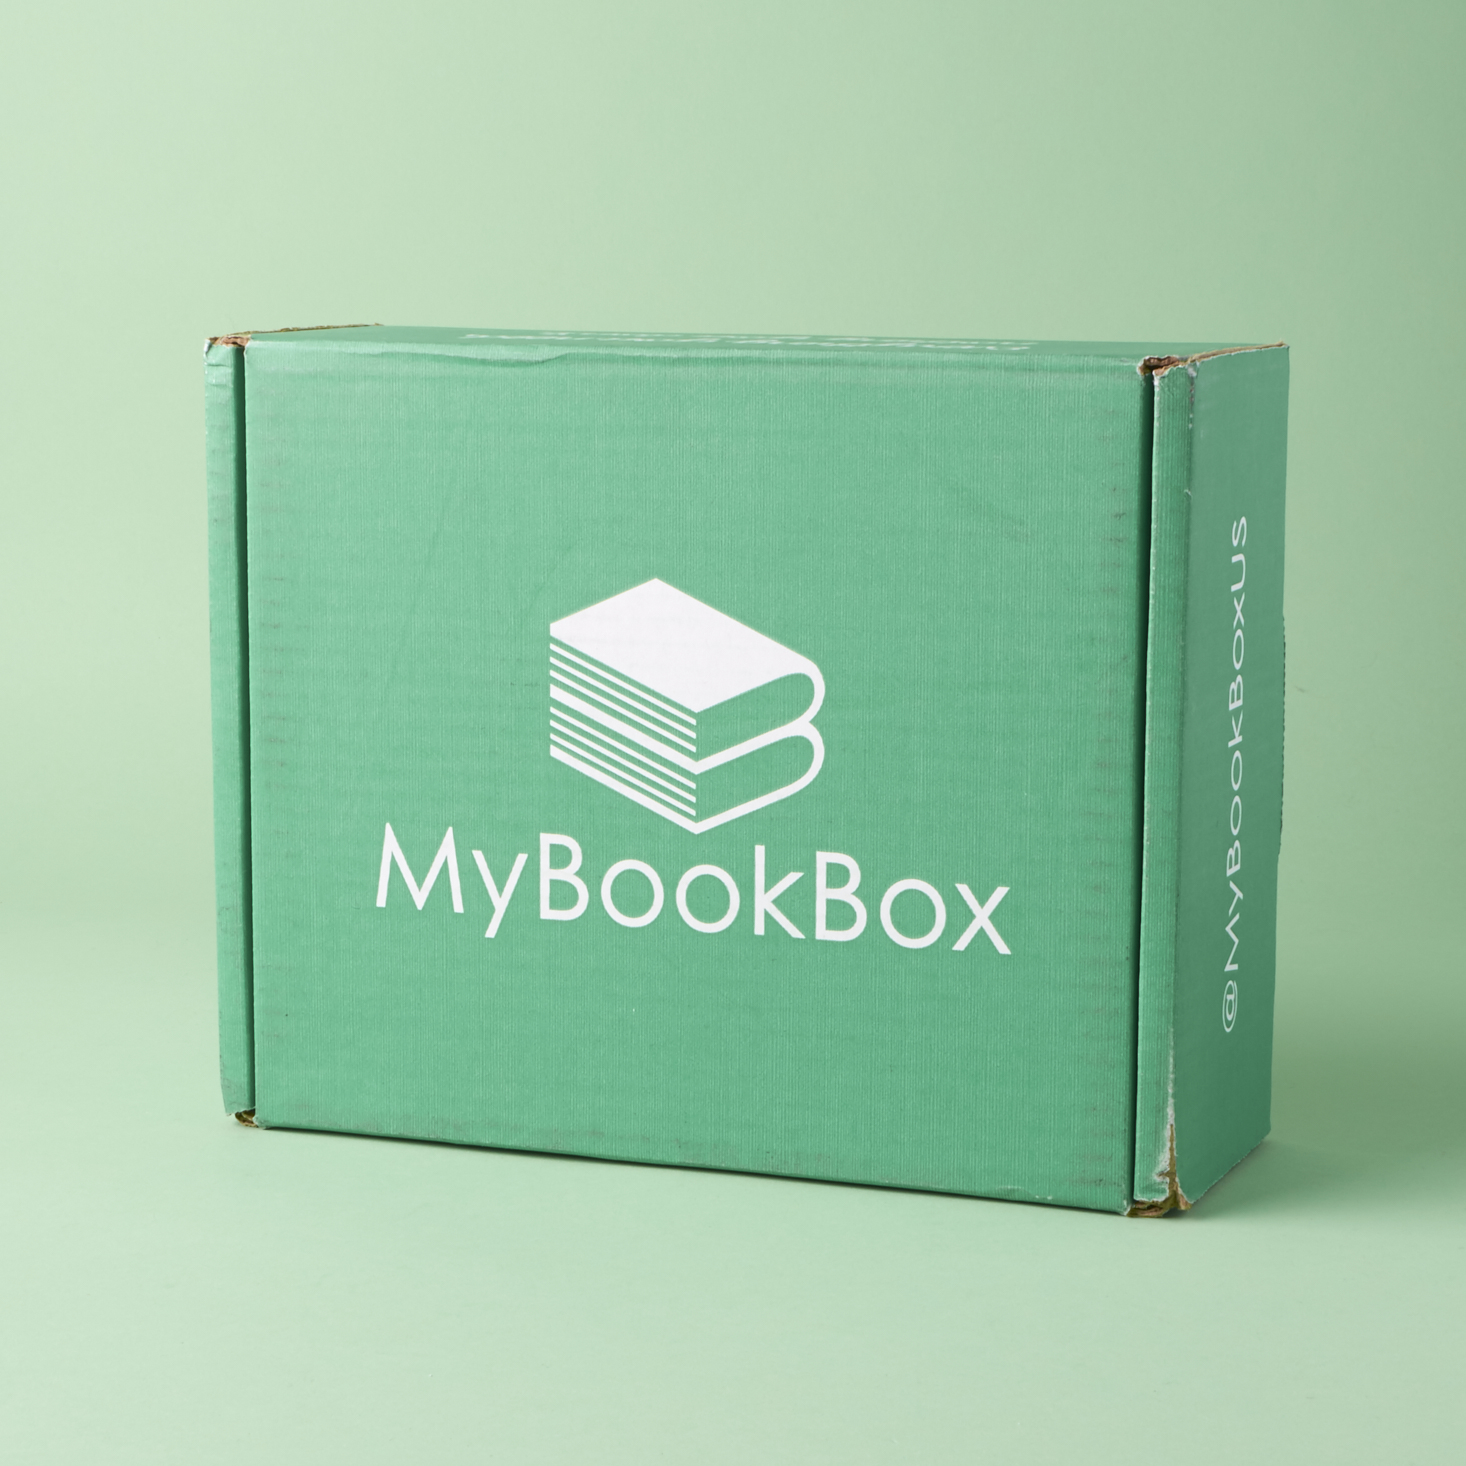 Read our review of the December 2016 MyBookBox!